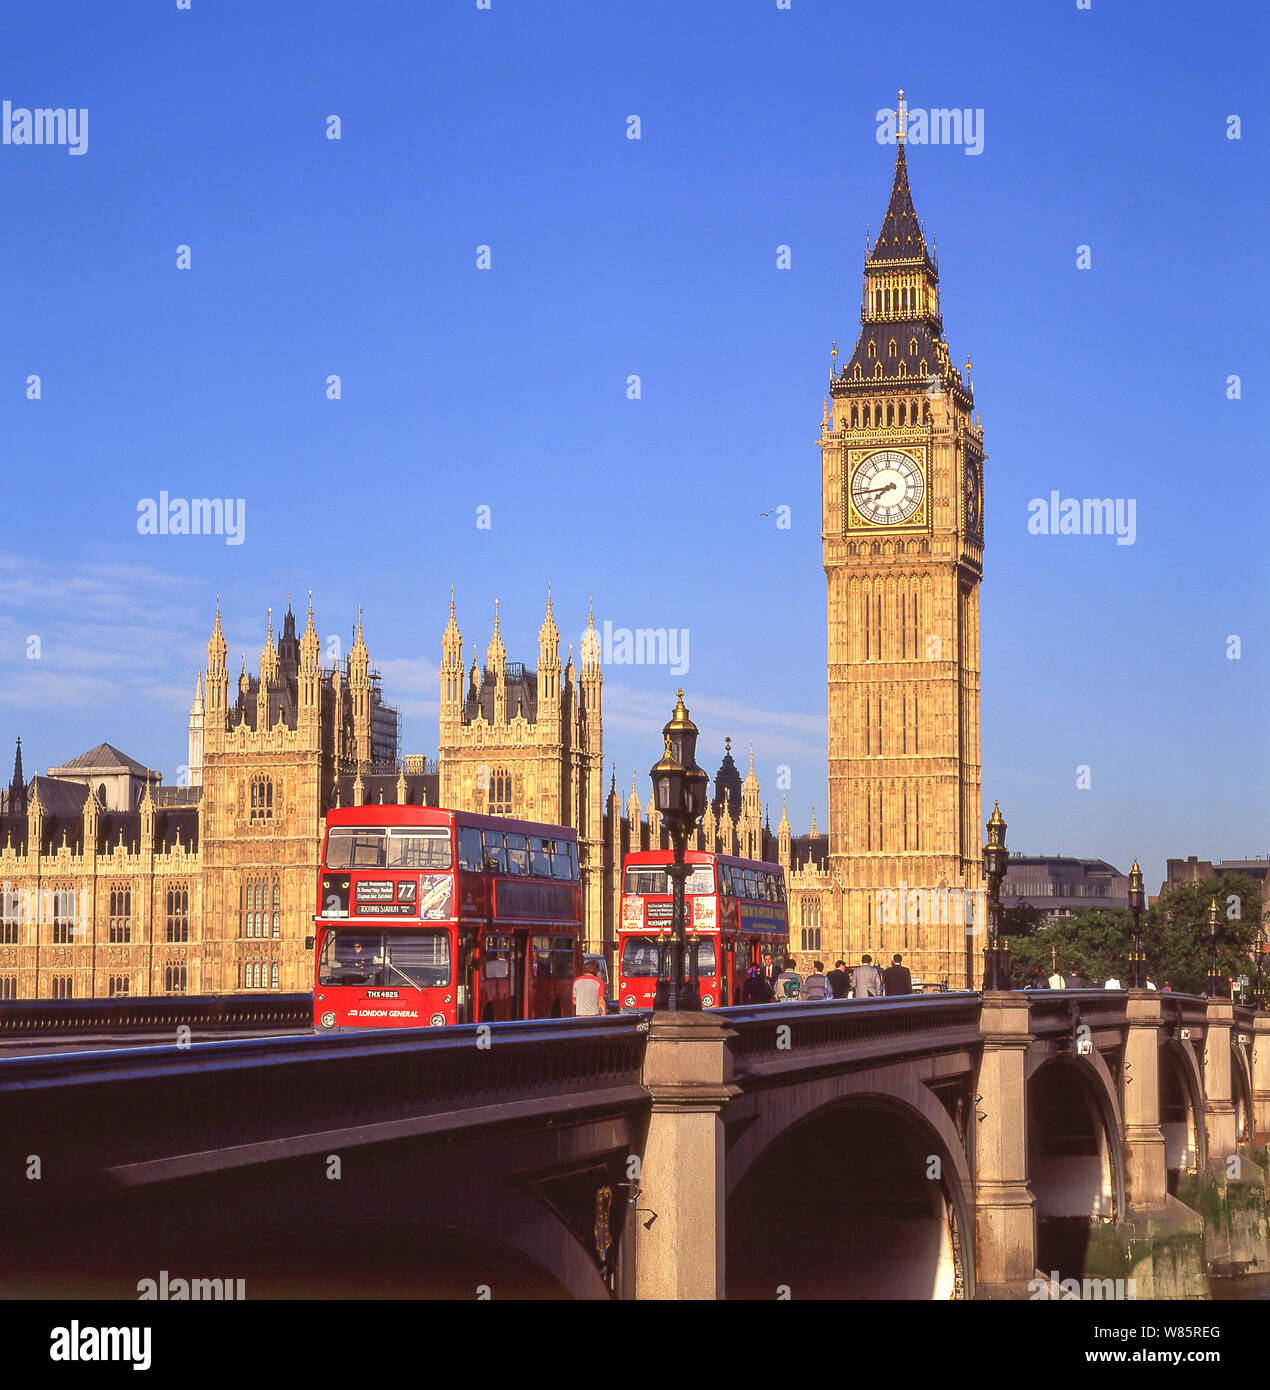 The Palace of Westminster (Houses of Parliament) across River Thames, City of Westminster, London, England, United Kingdom Stock Photo